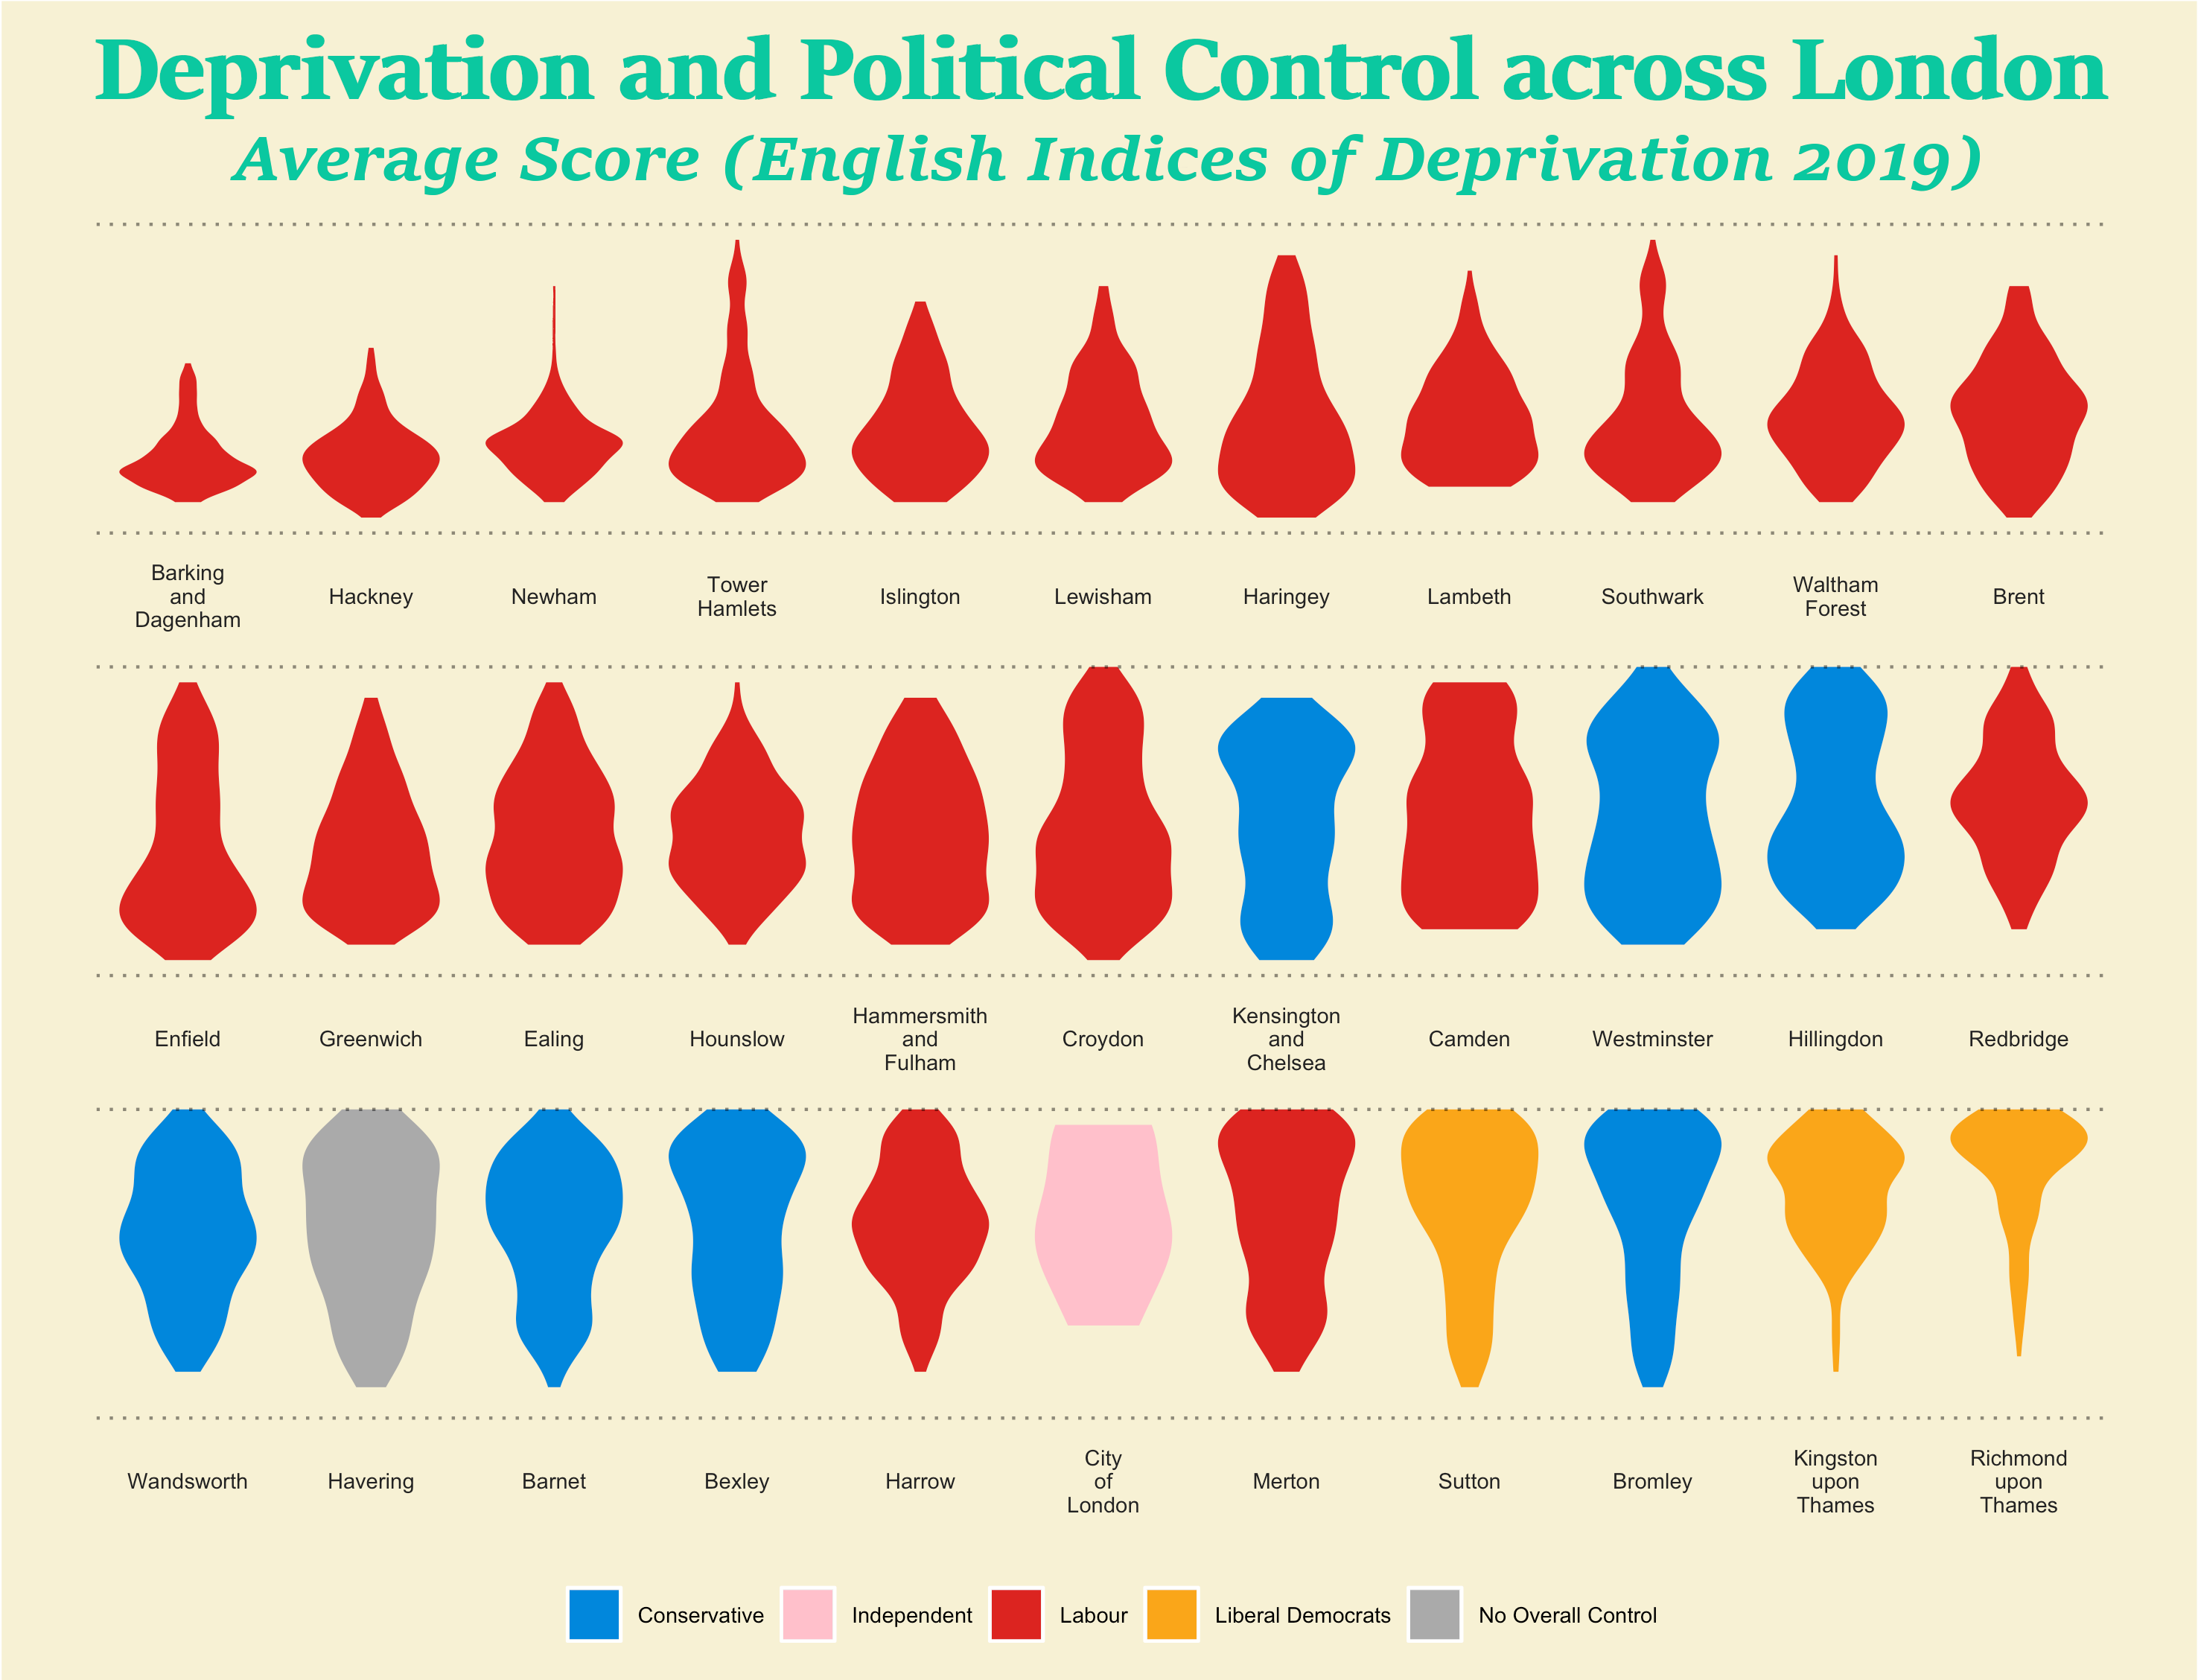 Final Lava Lamp showing London Deprivation and Political Control in London Boroughs